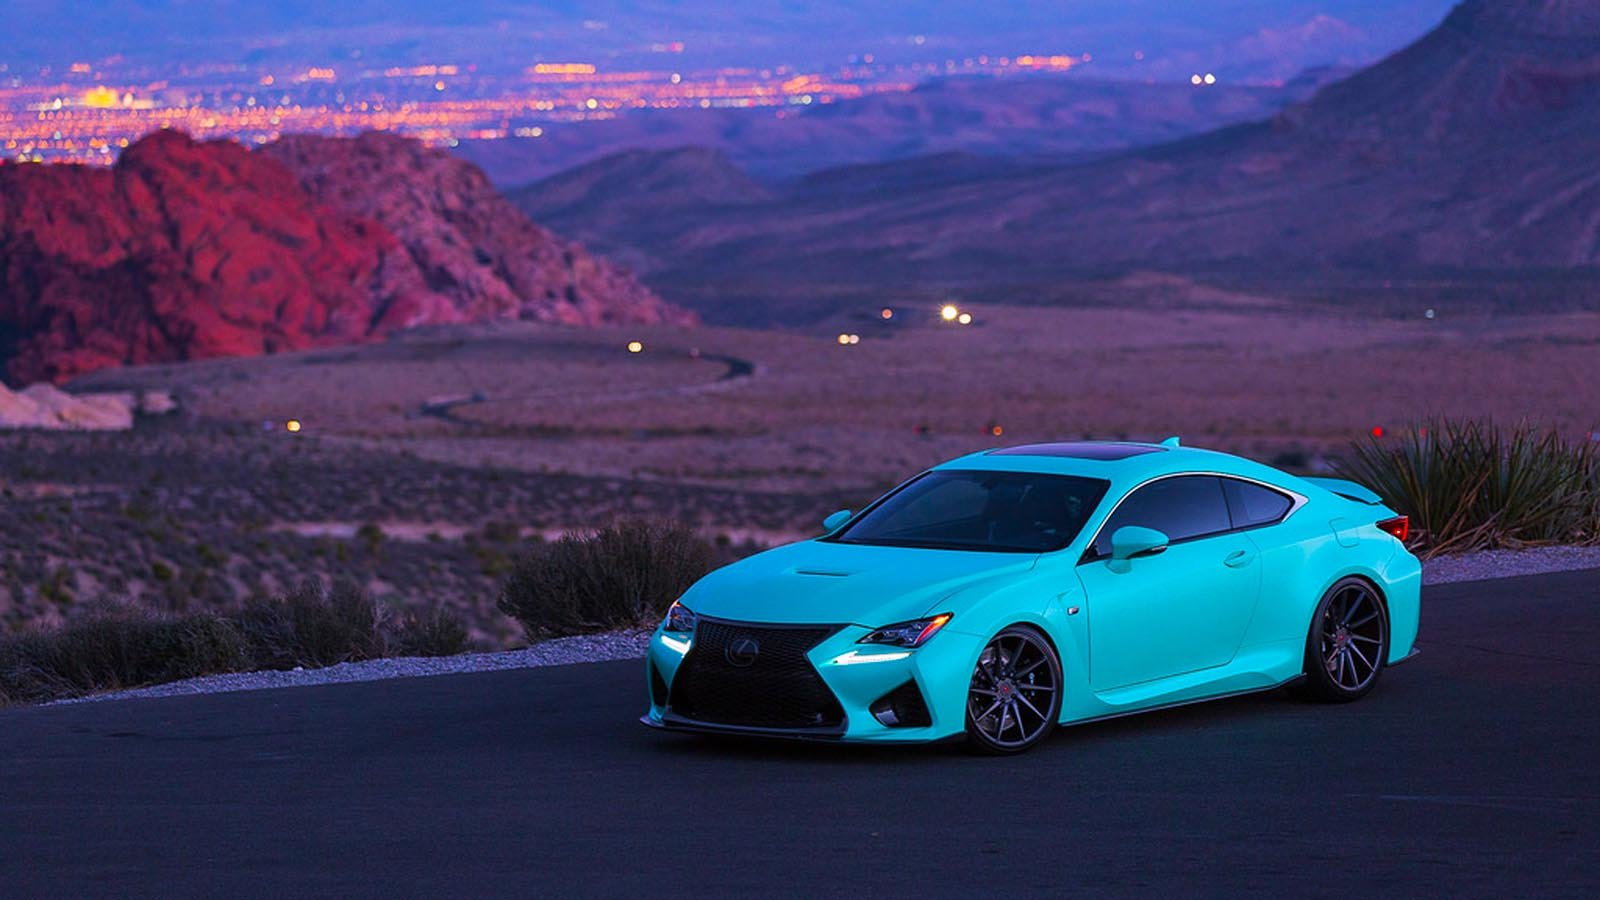 Some of the Best Toyota / Lexus Sports Cars | Clublexus